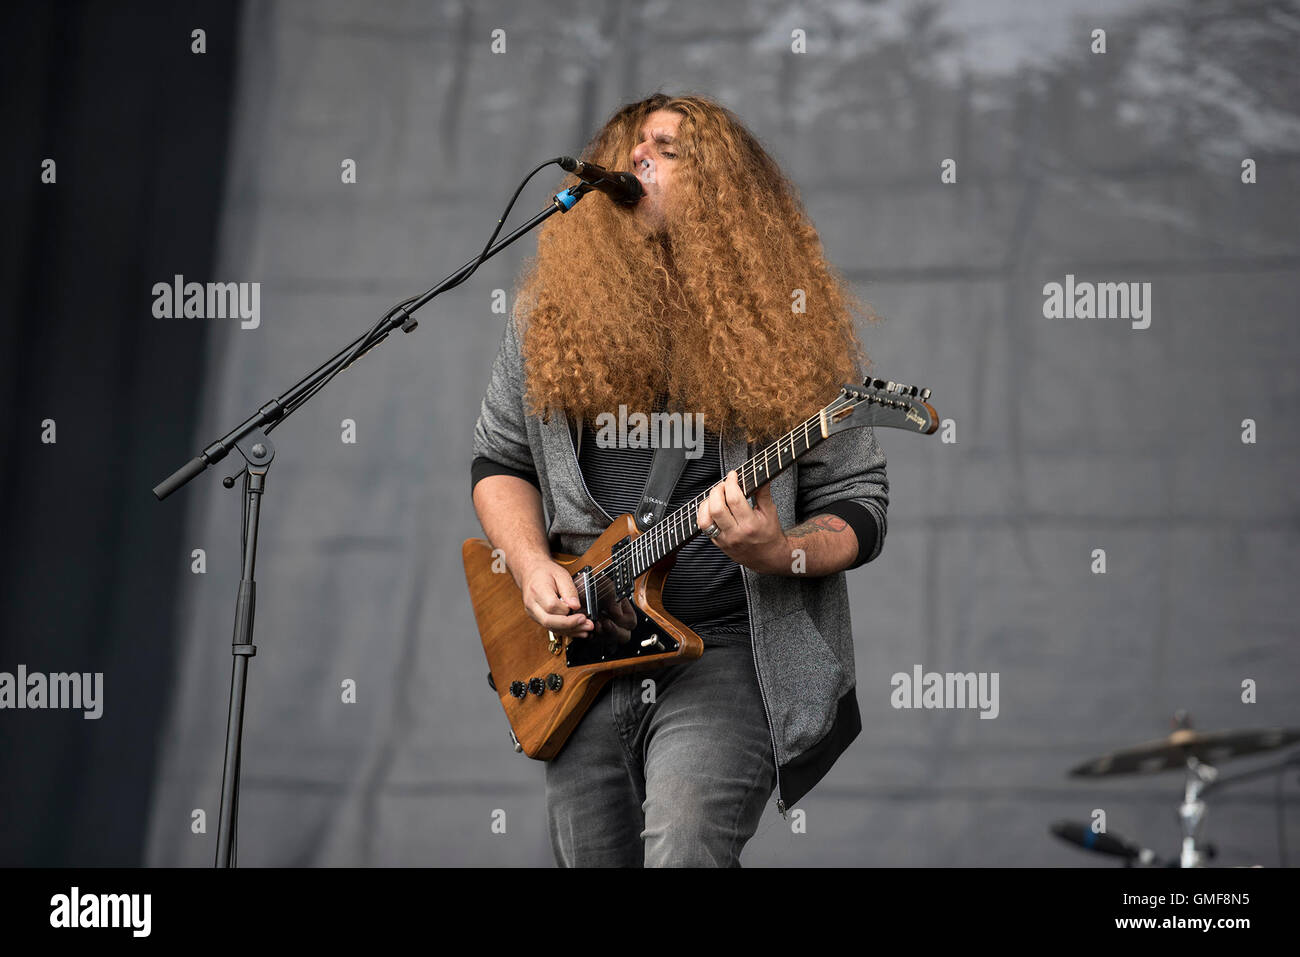 Leeds, UK. 26th August 2016. Claudio Sanchez, Travis Stever, Josh Eppard and Zach Cooper of Coheed and Cambria perform on the main stage at Leeds Festival 2016, 26/08/2016 Credit:  Gary Mather/Alamy Live News Stock Photo